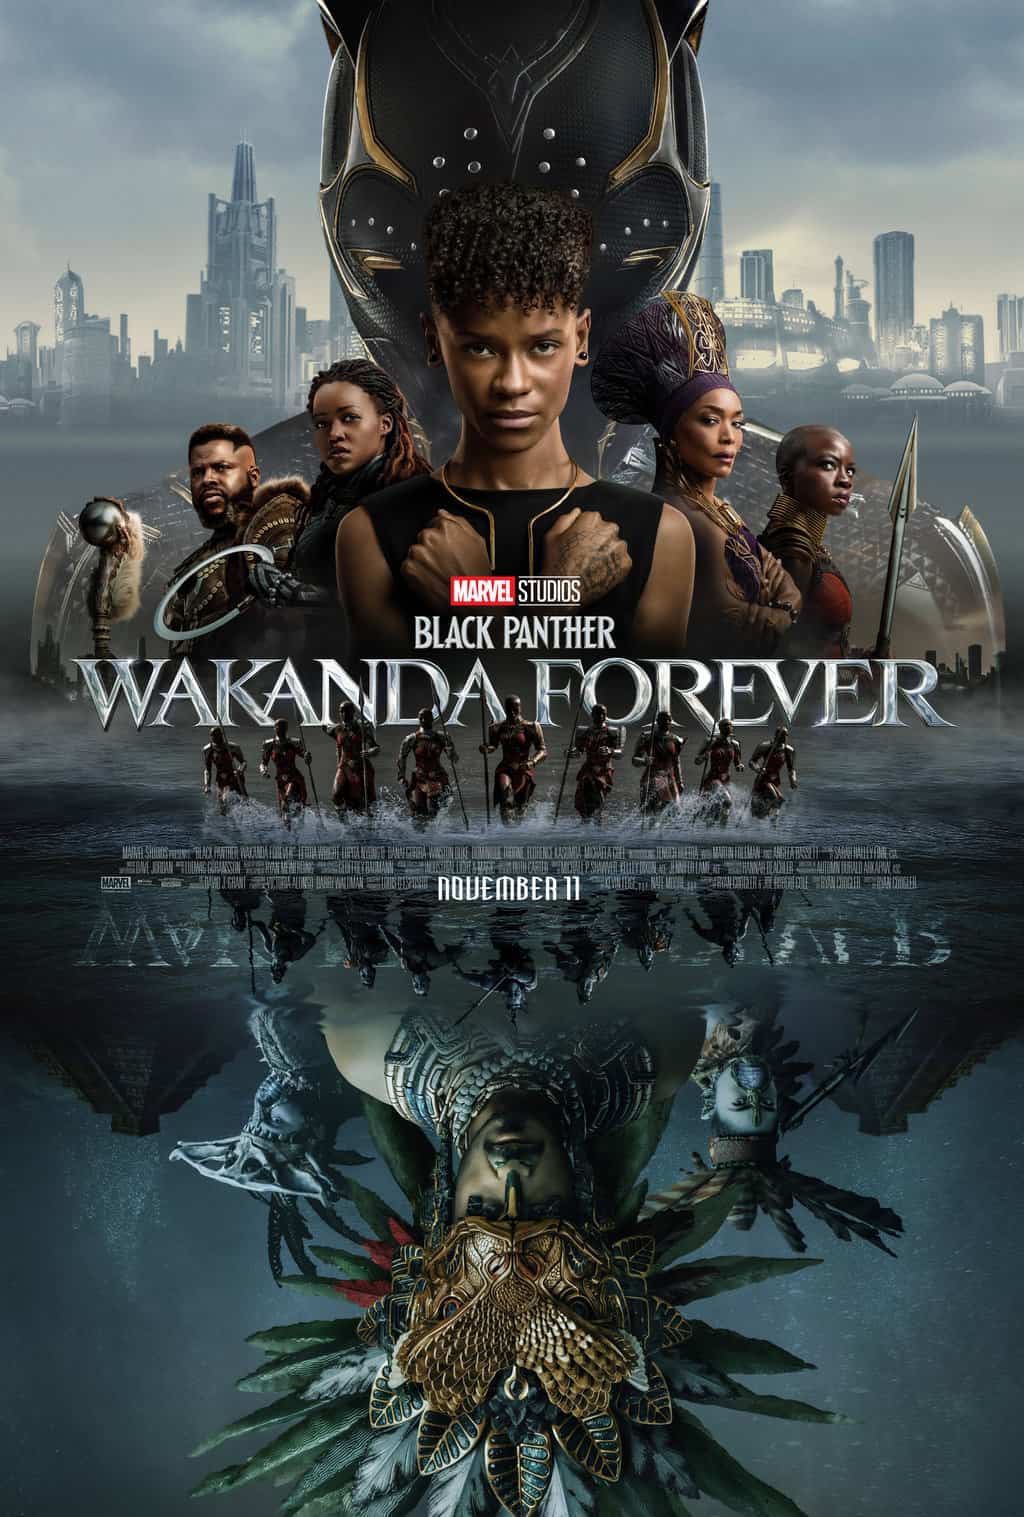 When can you pee during BLACK PANTHER: WAKANDA FORVER